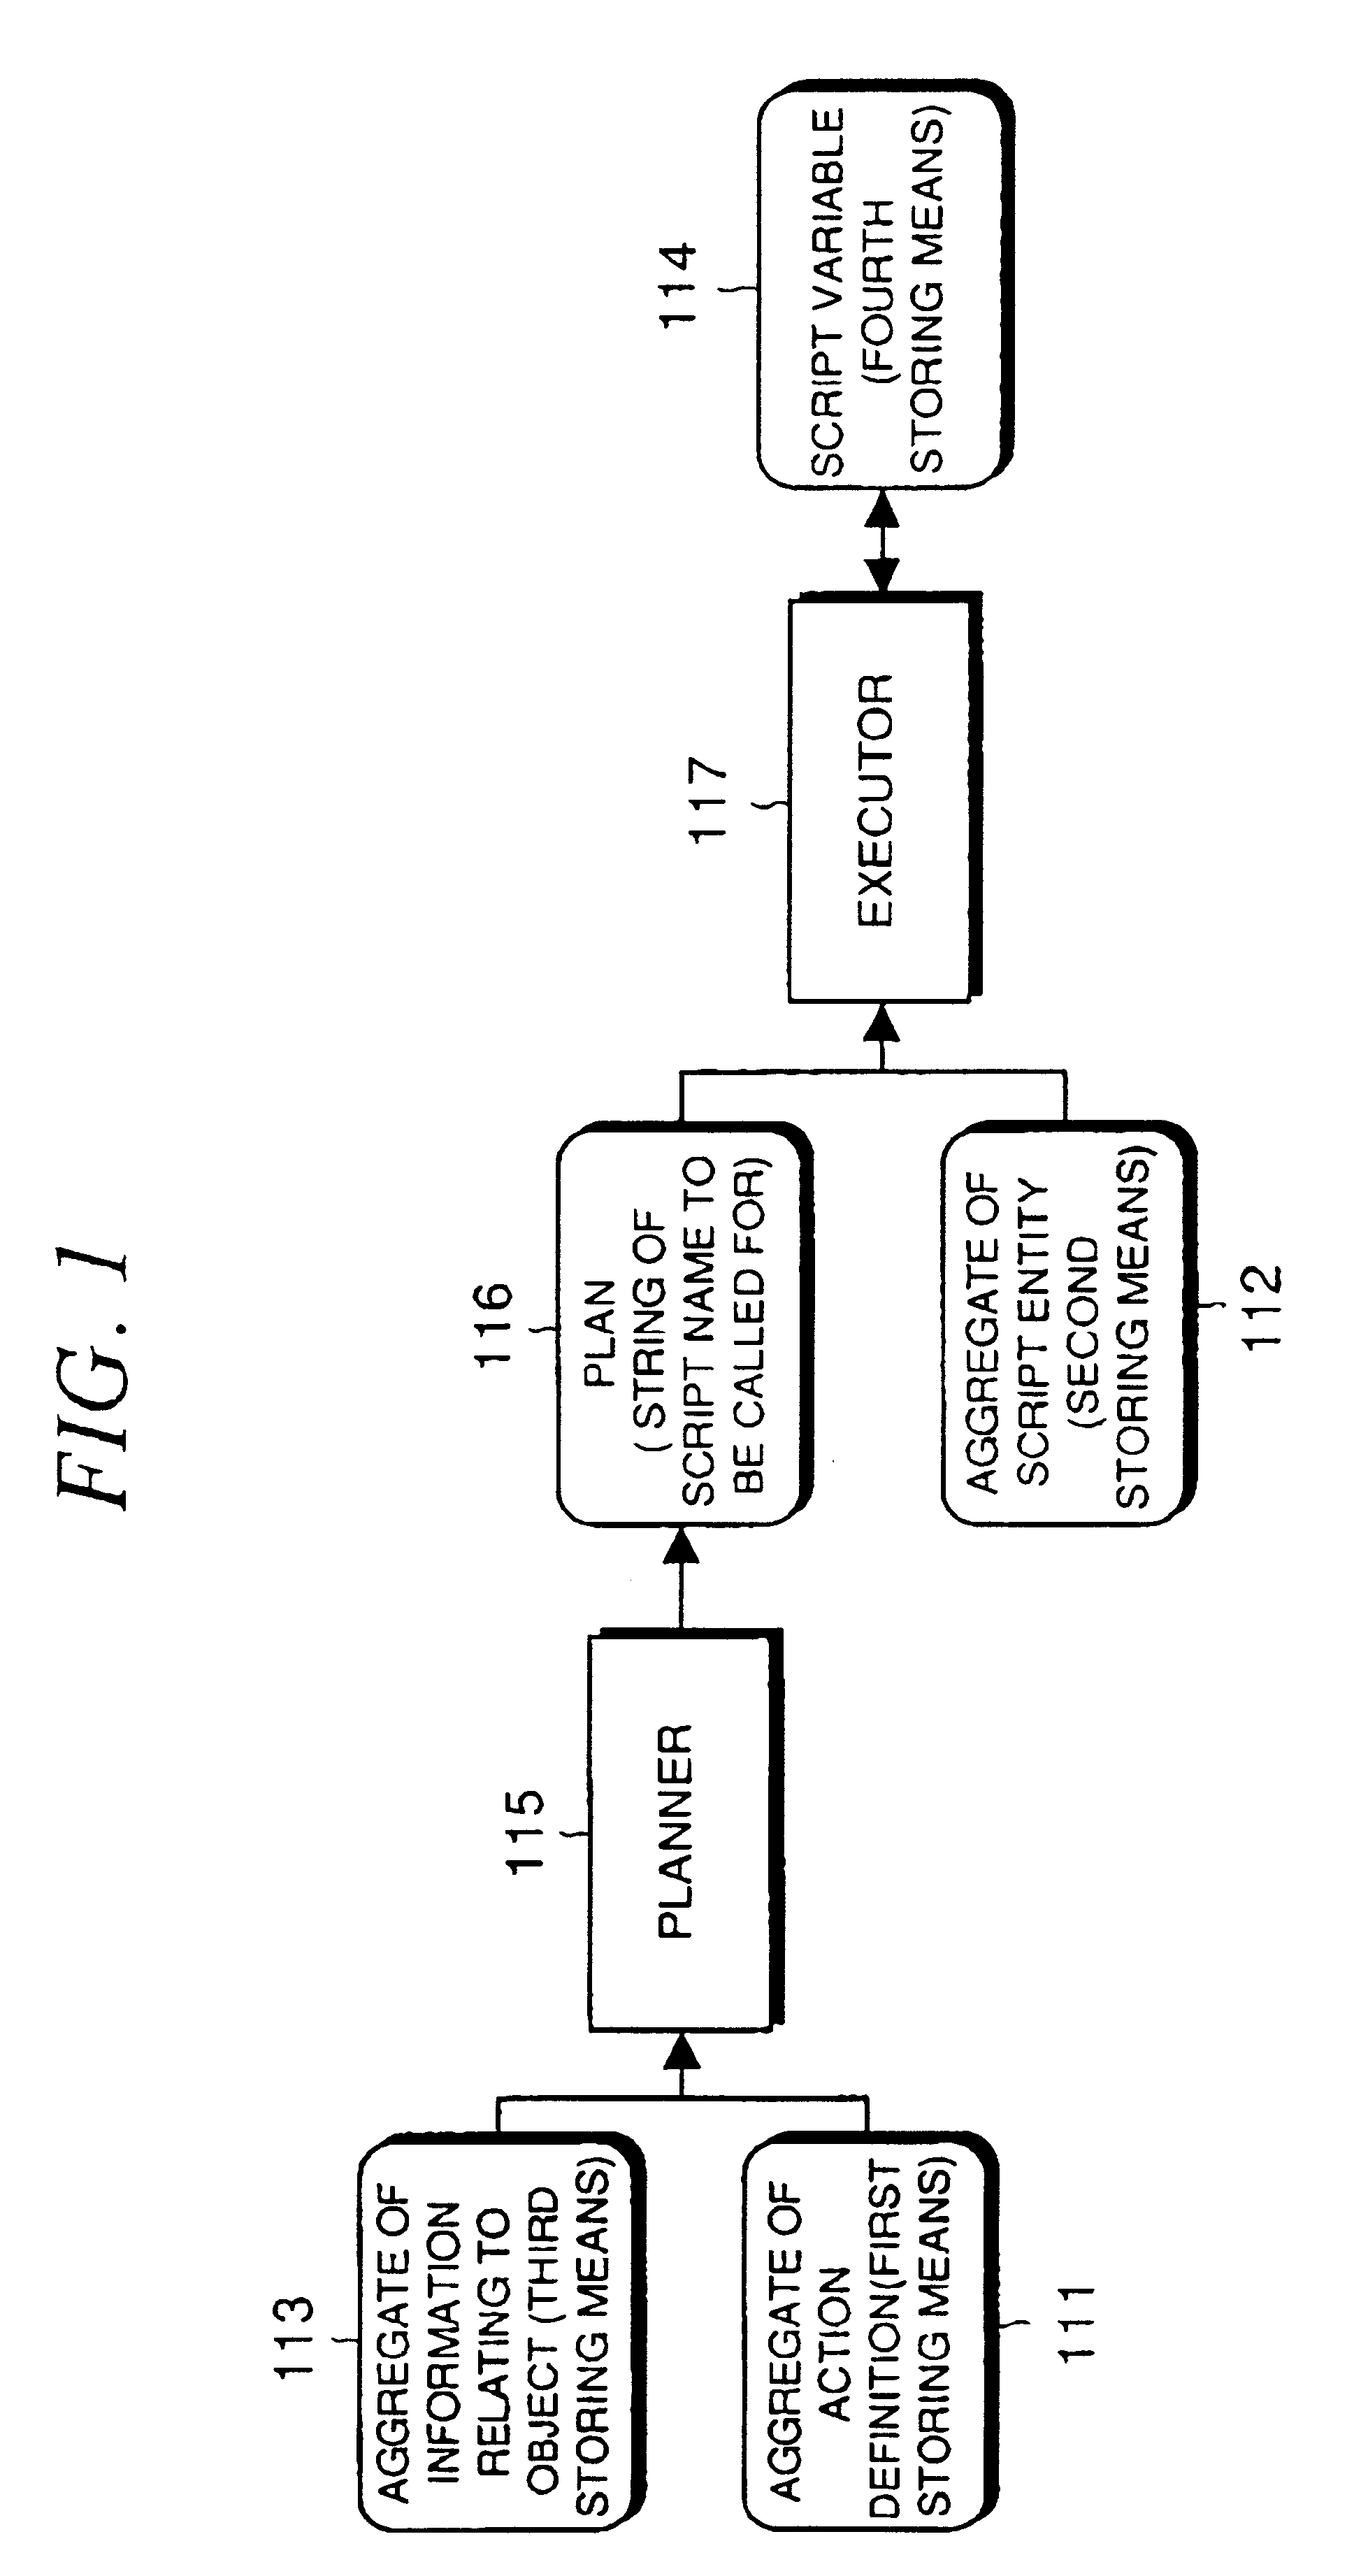 Agent system for generating and executing a plan, and for re-planning